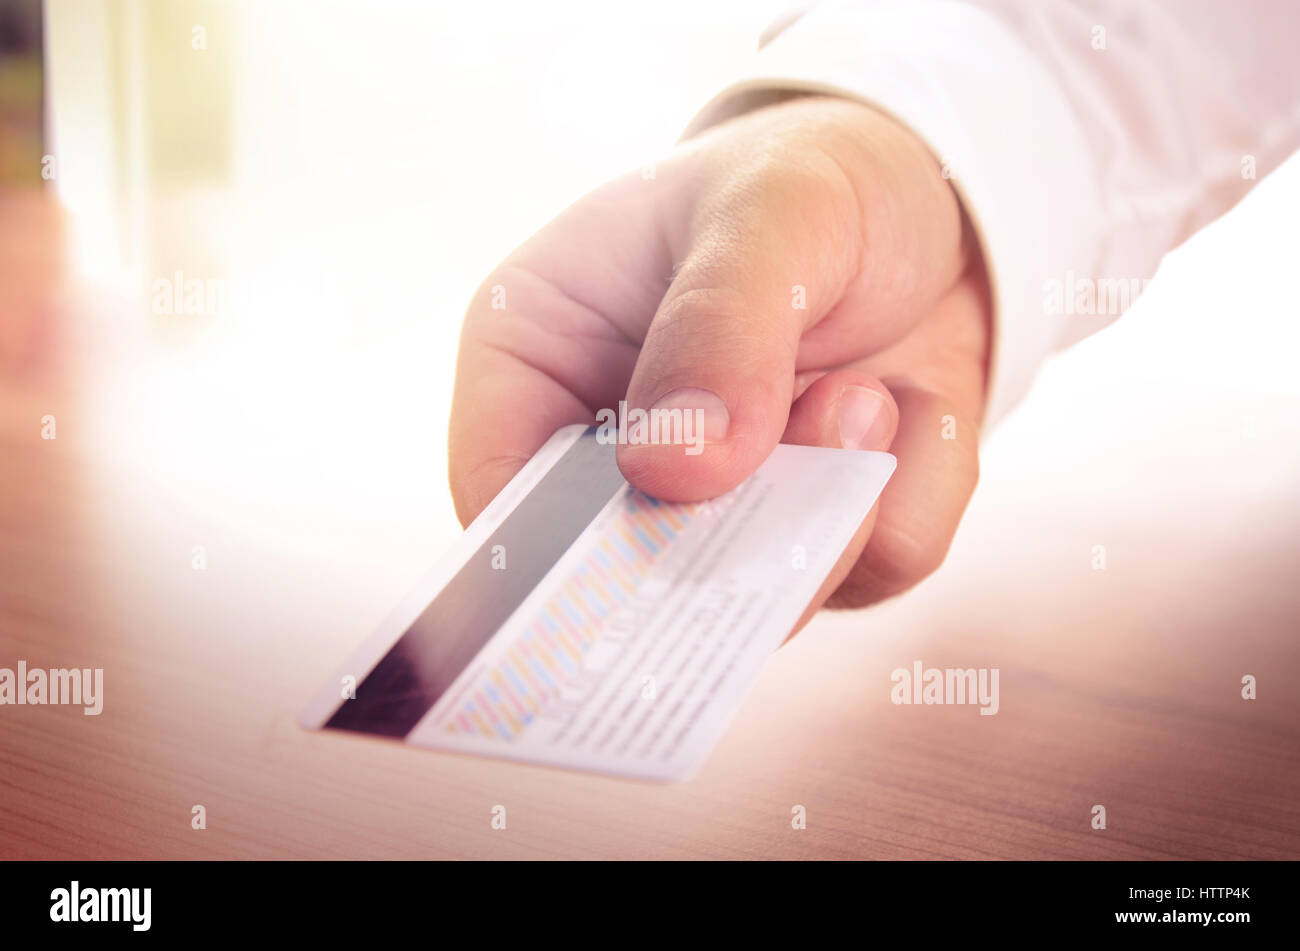 Man’s hand holding a credit card. Concept for business, finance, banking, shopping. Stock Photo